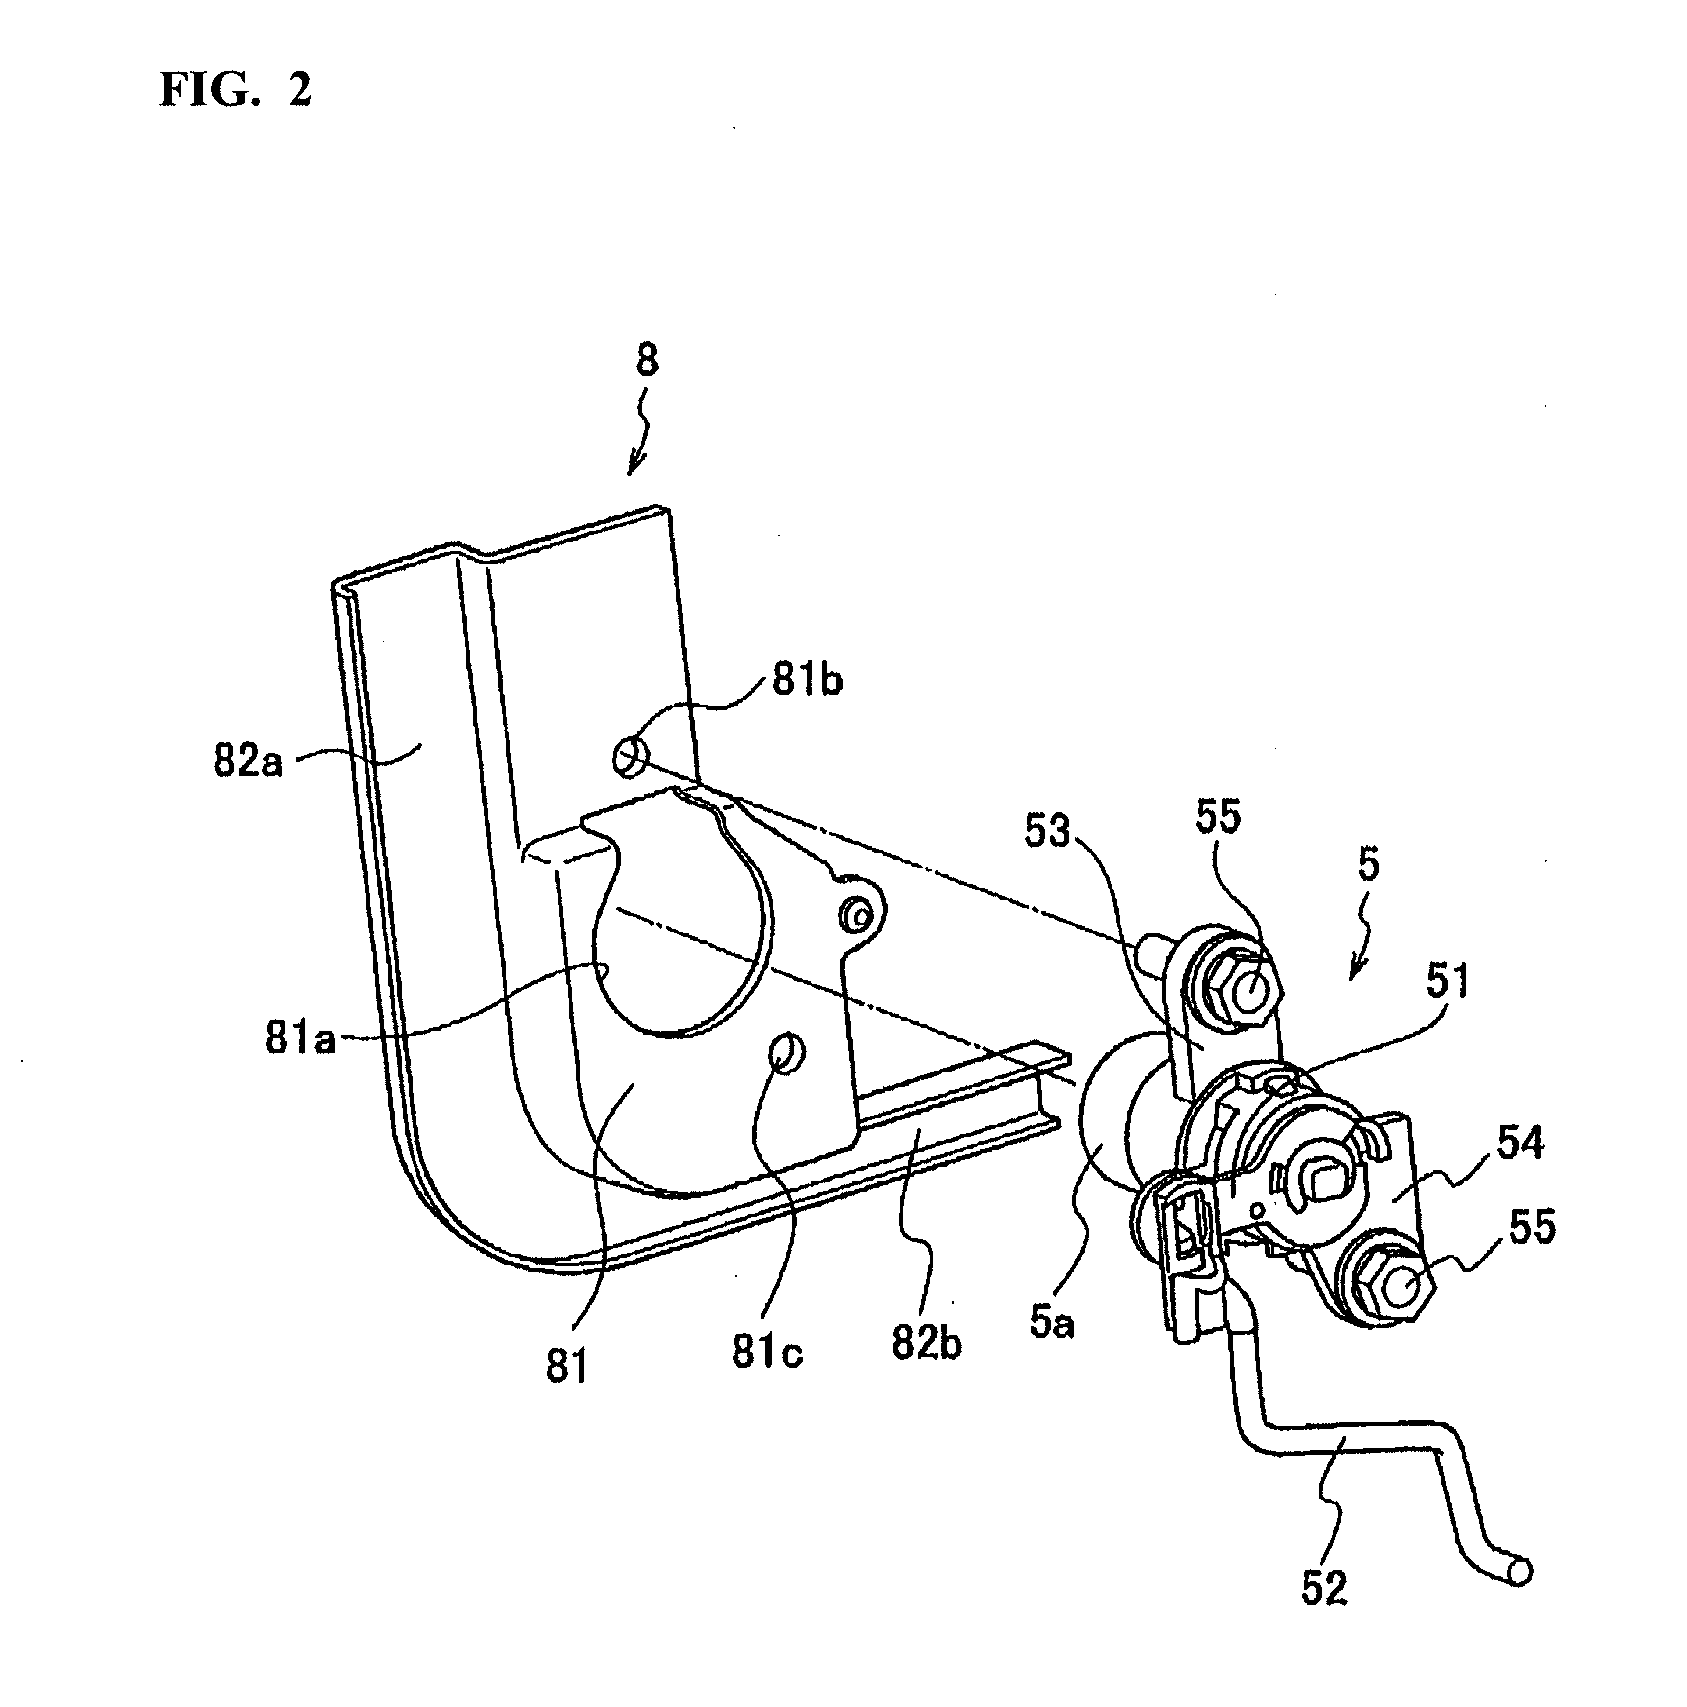 Structure for outside door handle of vehicles